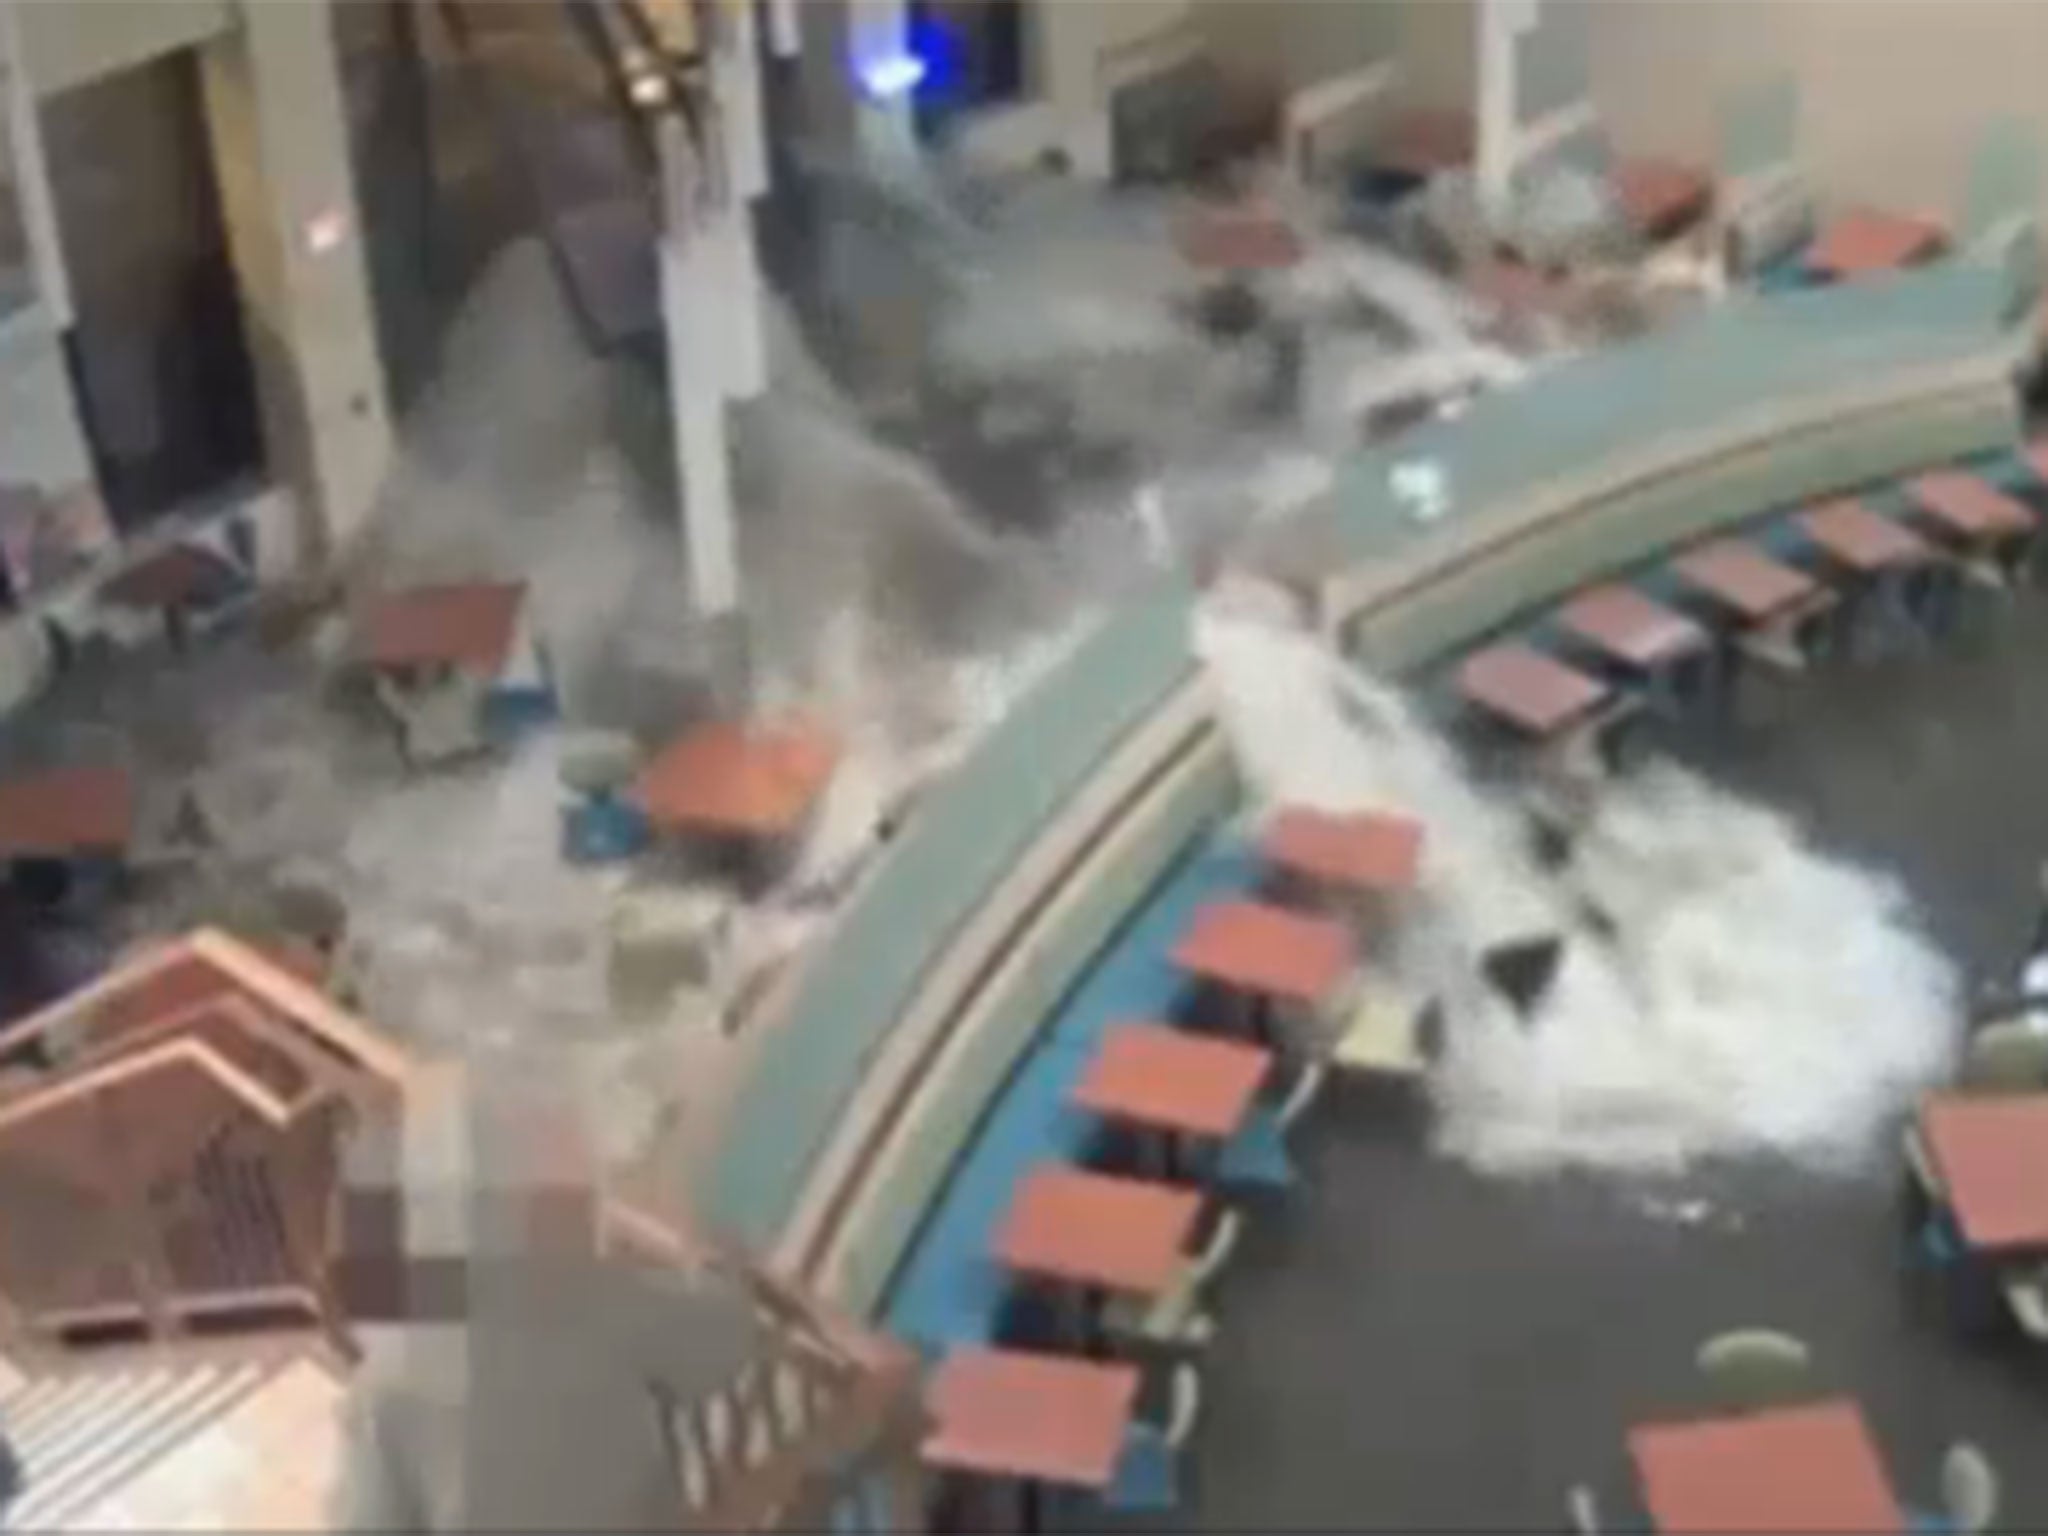 Watch the moment a flash flood smashes through a hospital cafeteria.